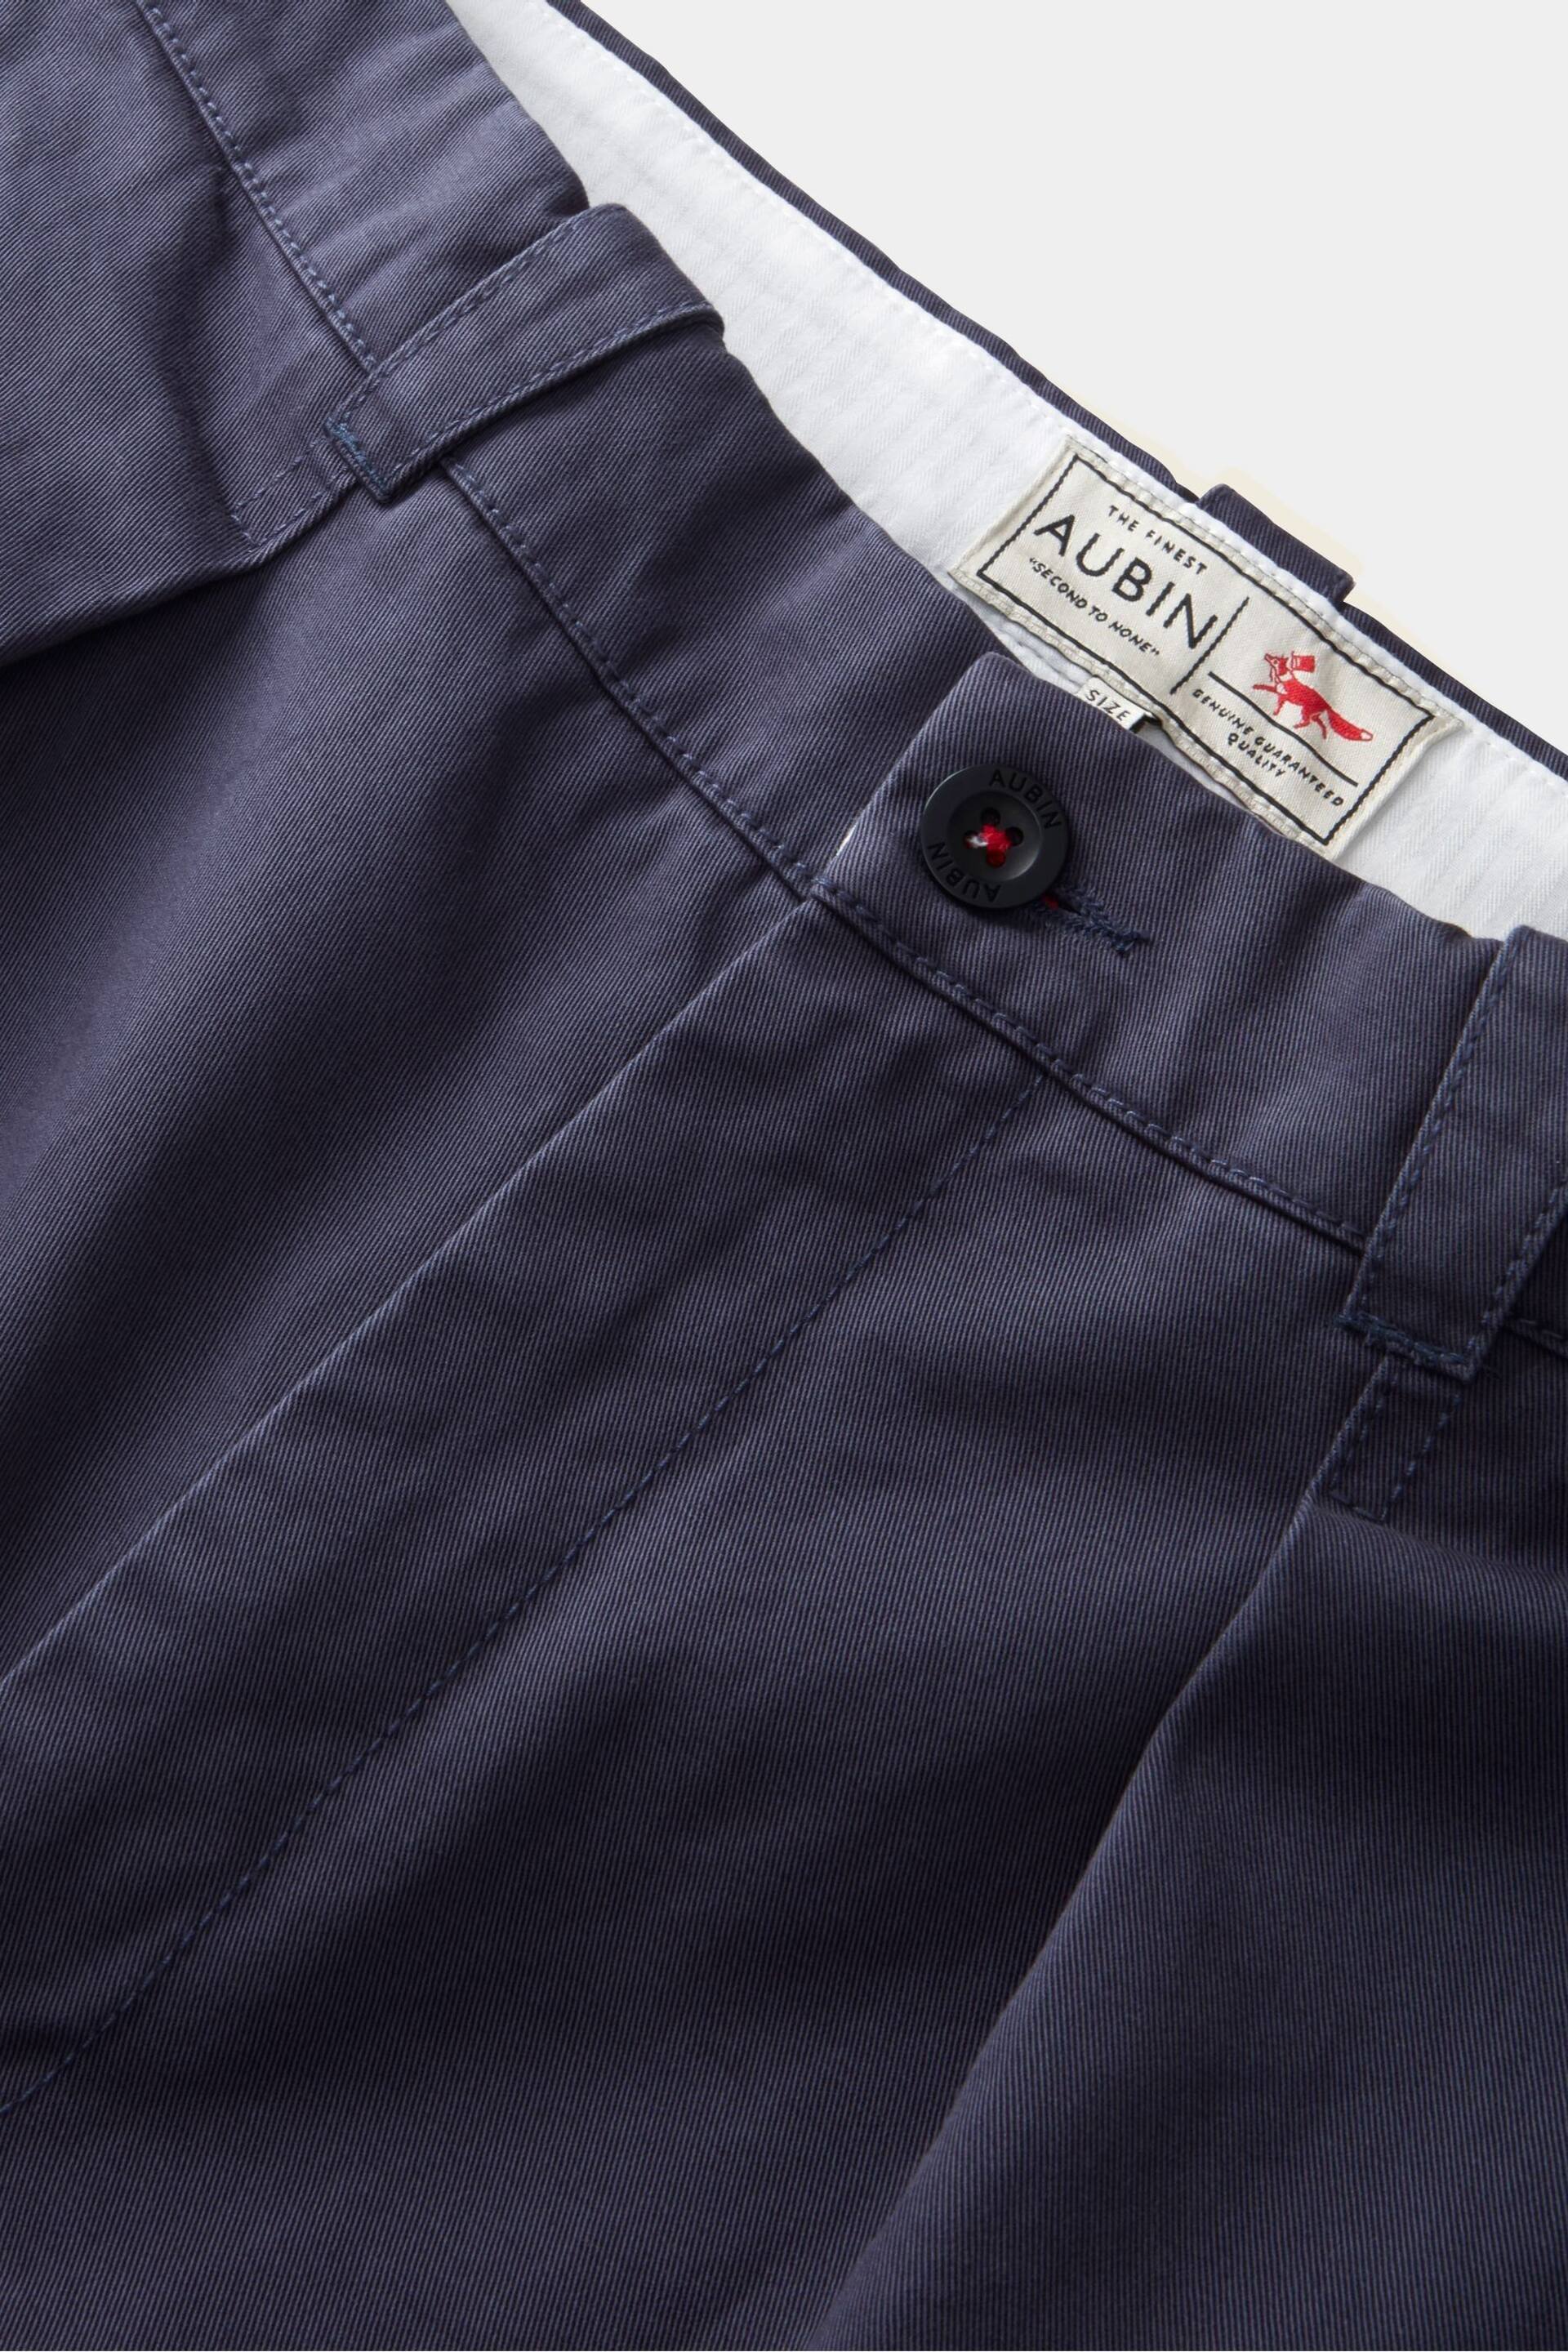 Aubin Barcombe Twill Trousers - Image 7 of 7